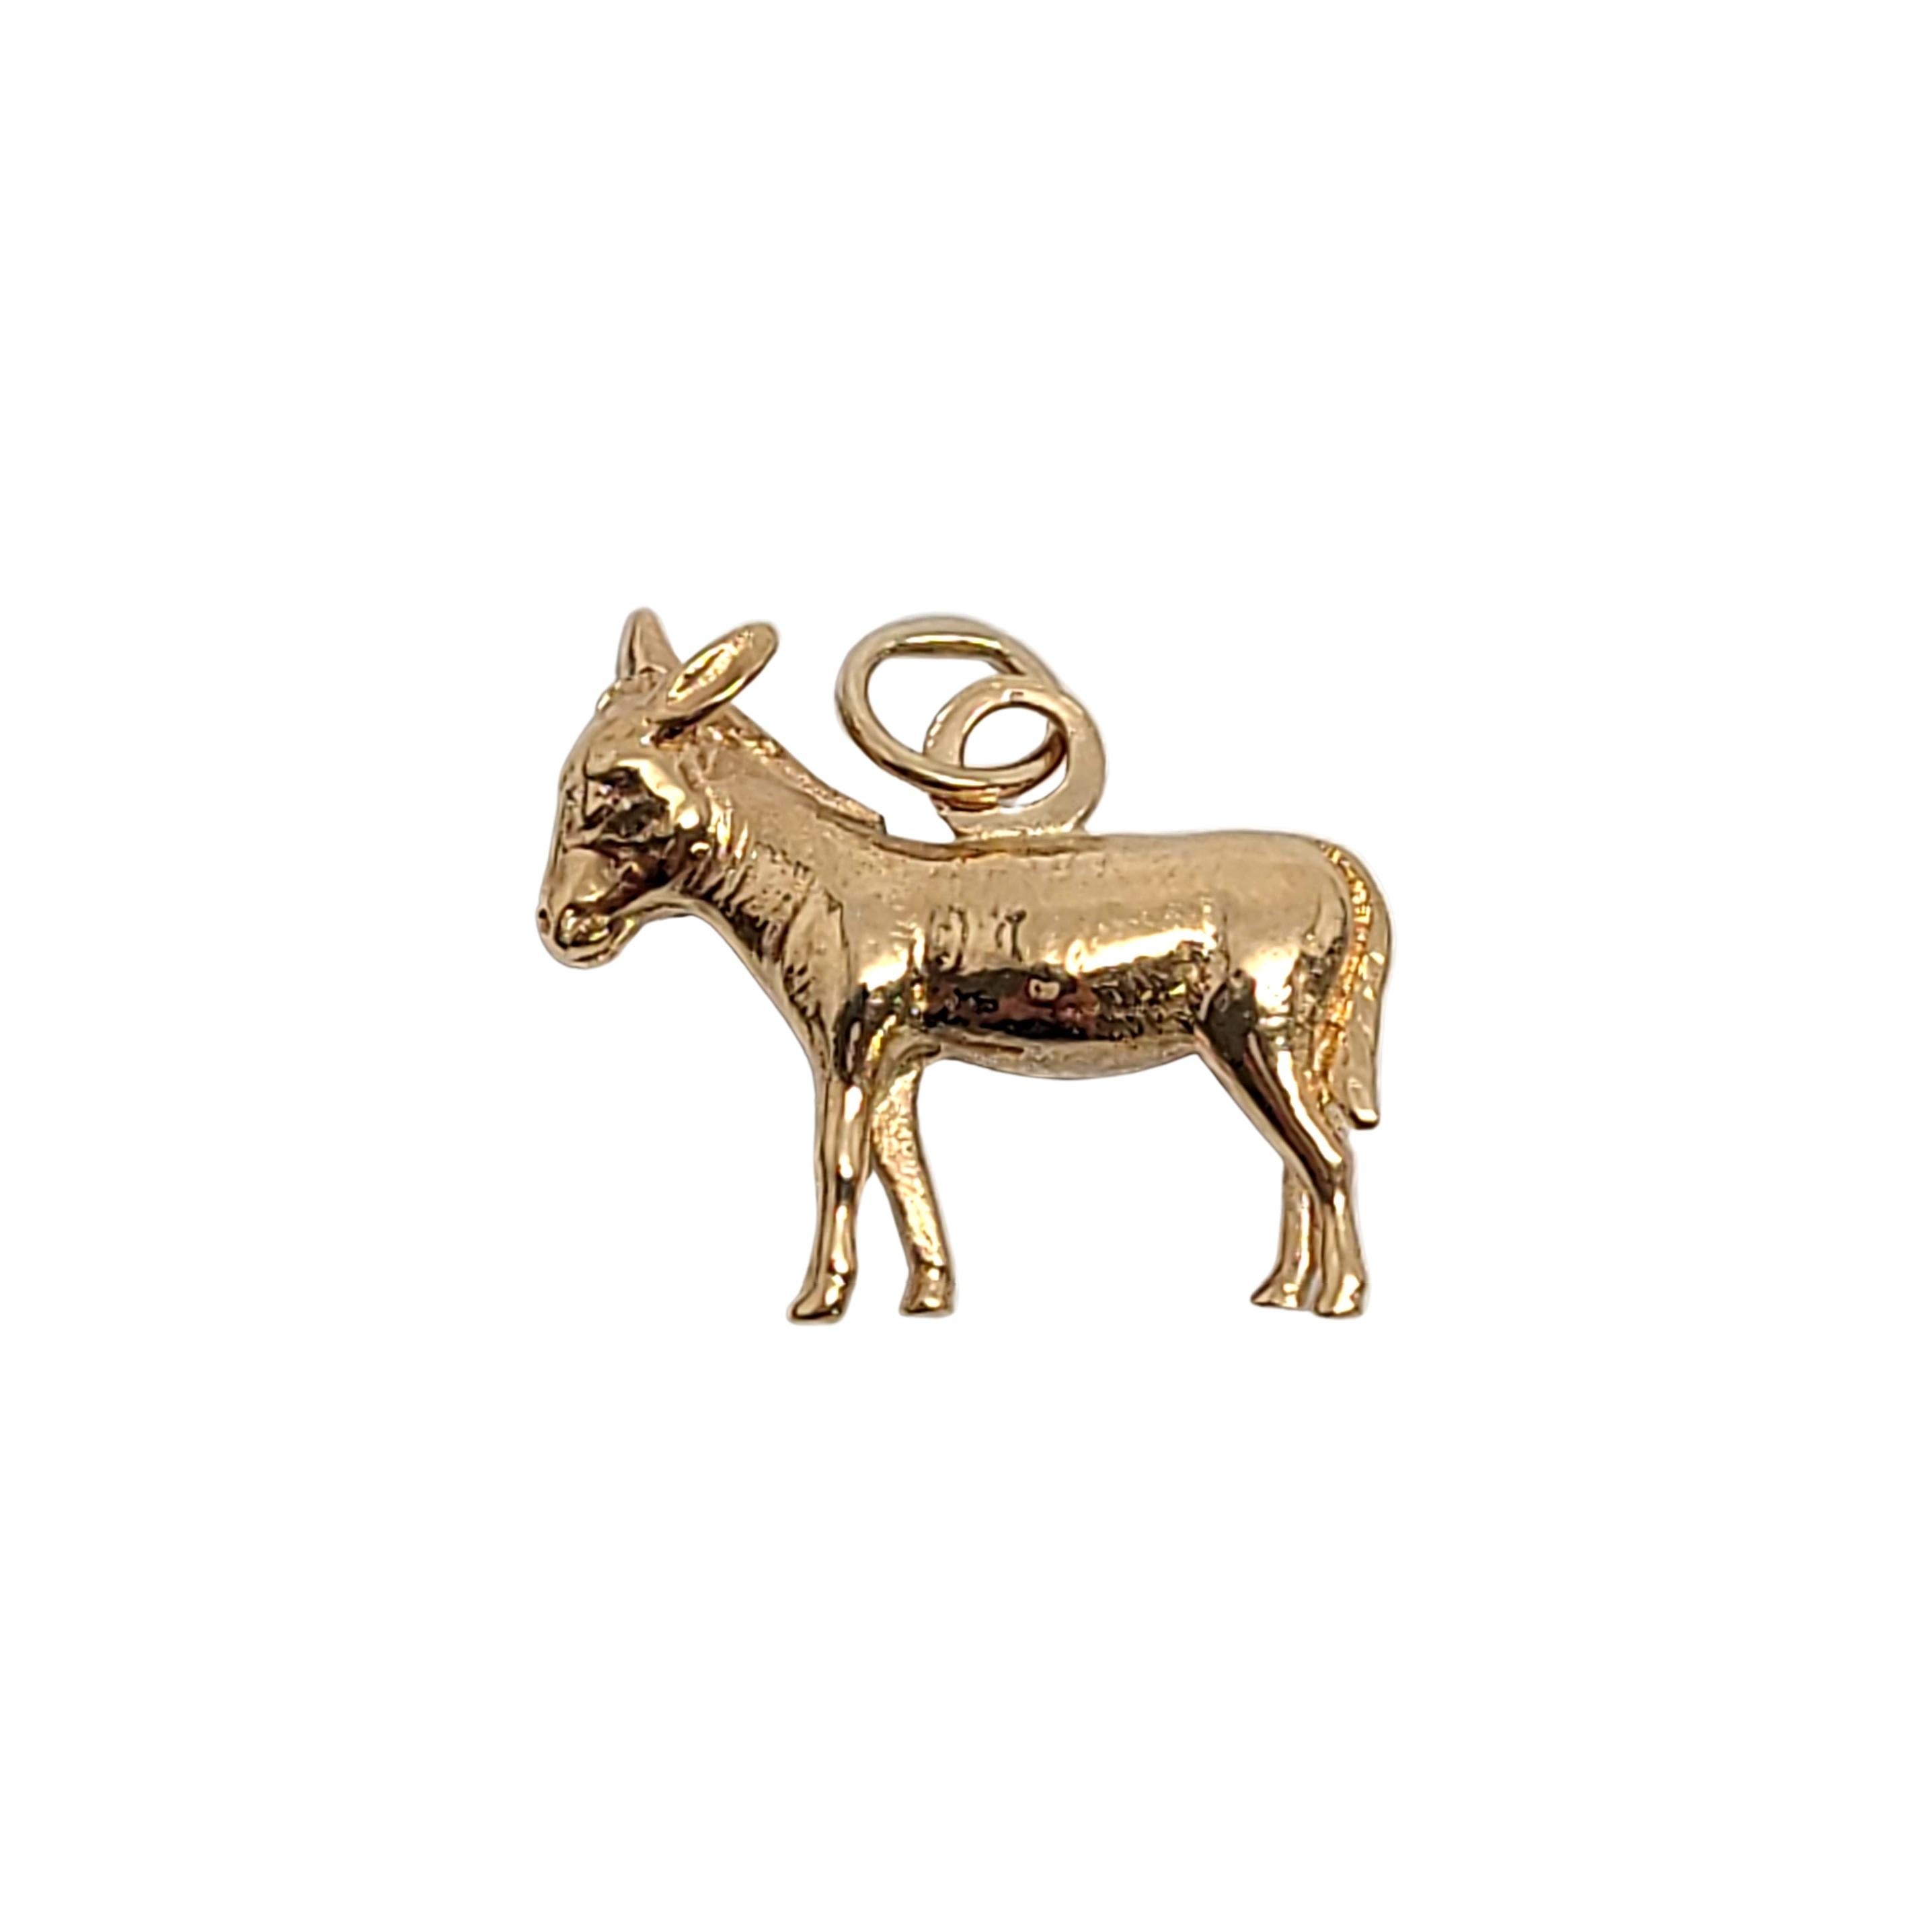 Vintage 14K Yellow Gold Donkey Charm

Adorable 3D Donkey Charm beautifully crafted in 14K yellow gold, this charm can become the perfect gift for any animal lover!

Size: 15mm X 18.4mm

Weight: 2.8 gr / 1.8 dwt

Tested 14K

Very good condition,